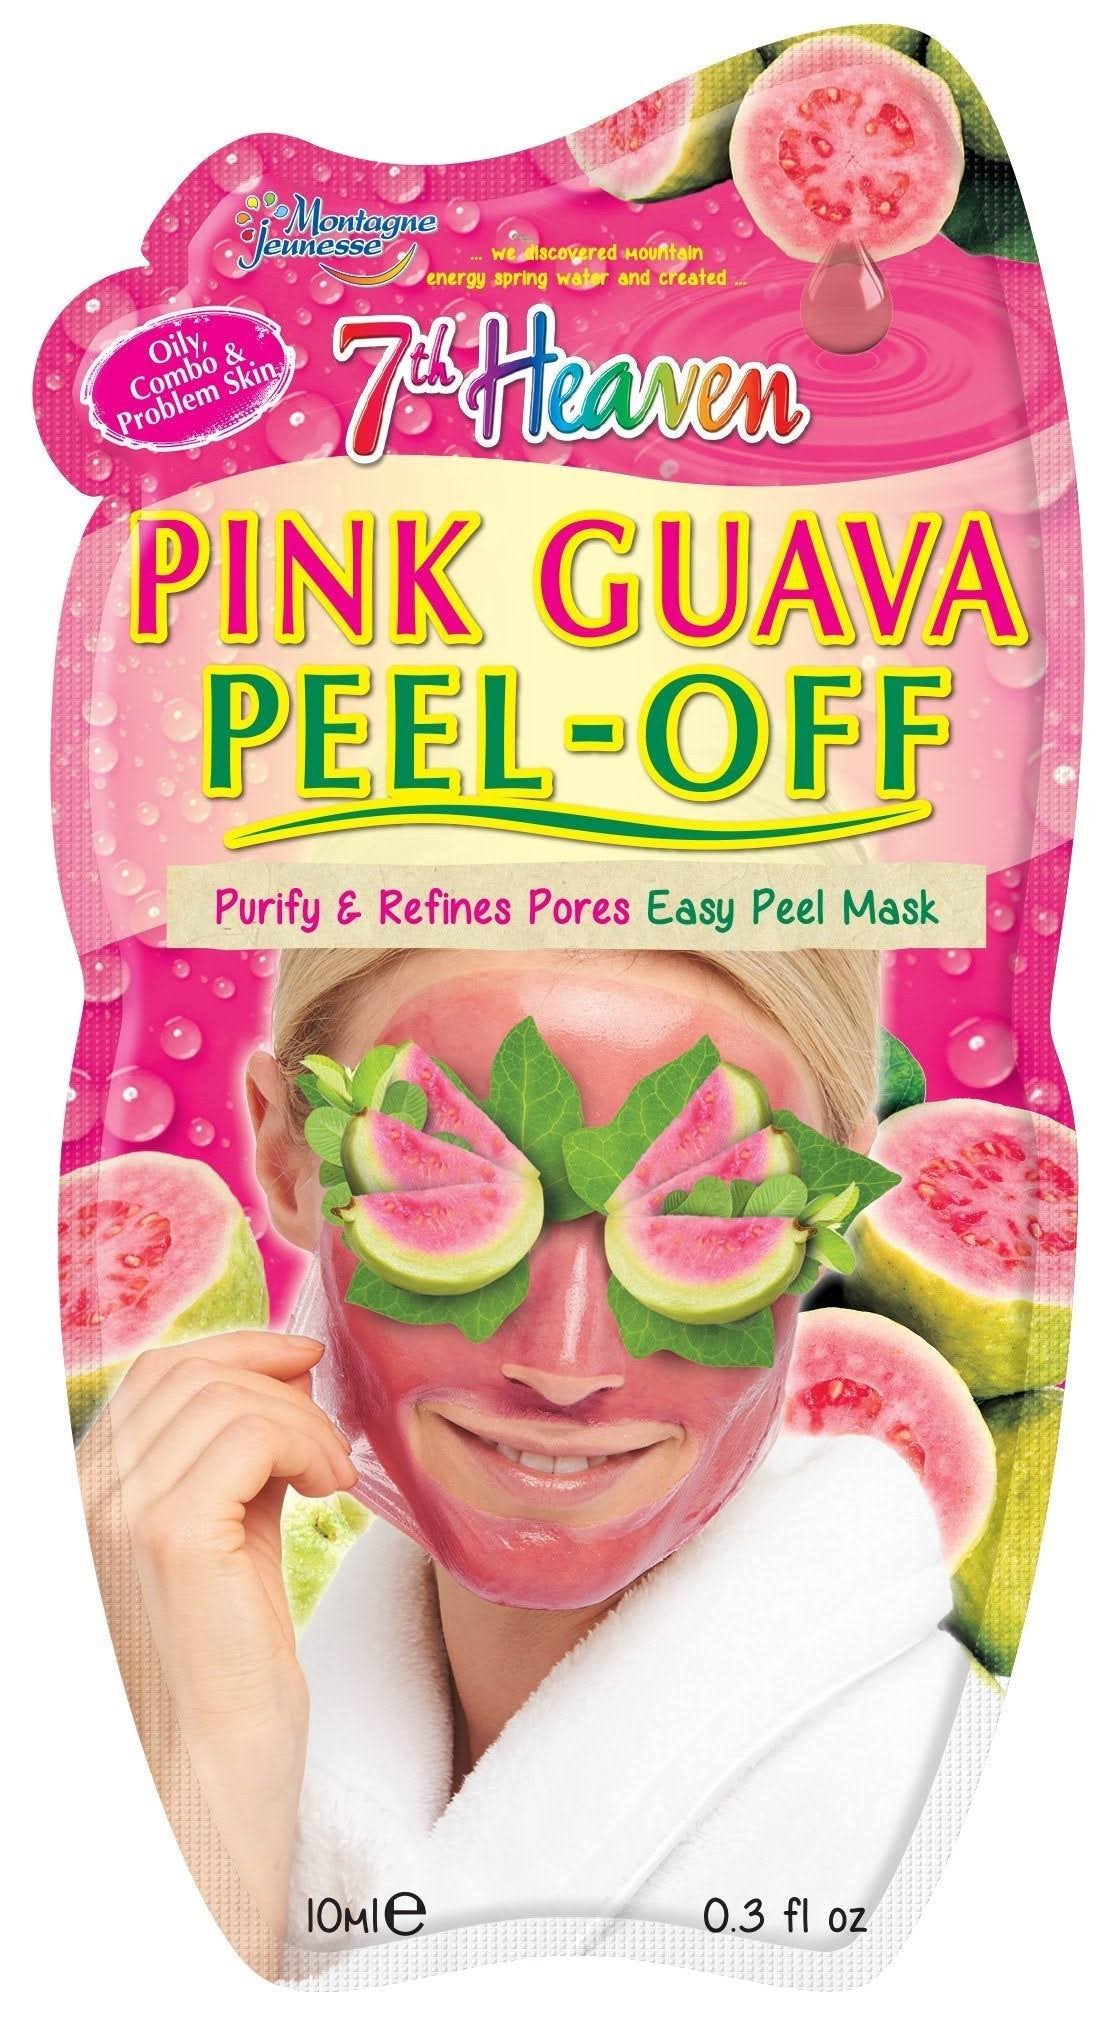 7th Heaven Pink Guava Peel-Off Face Mask 10ml